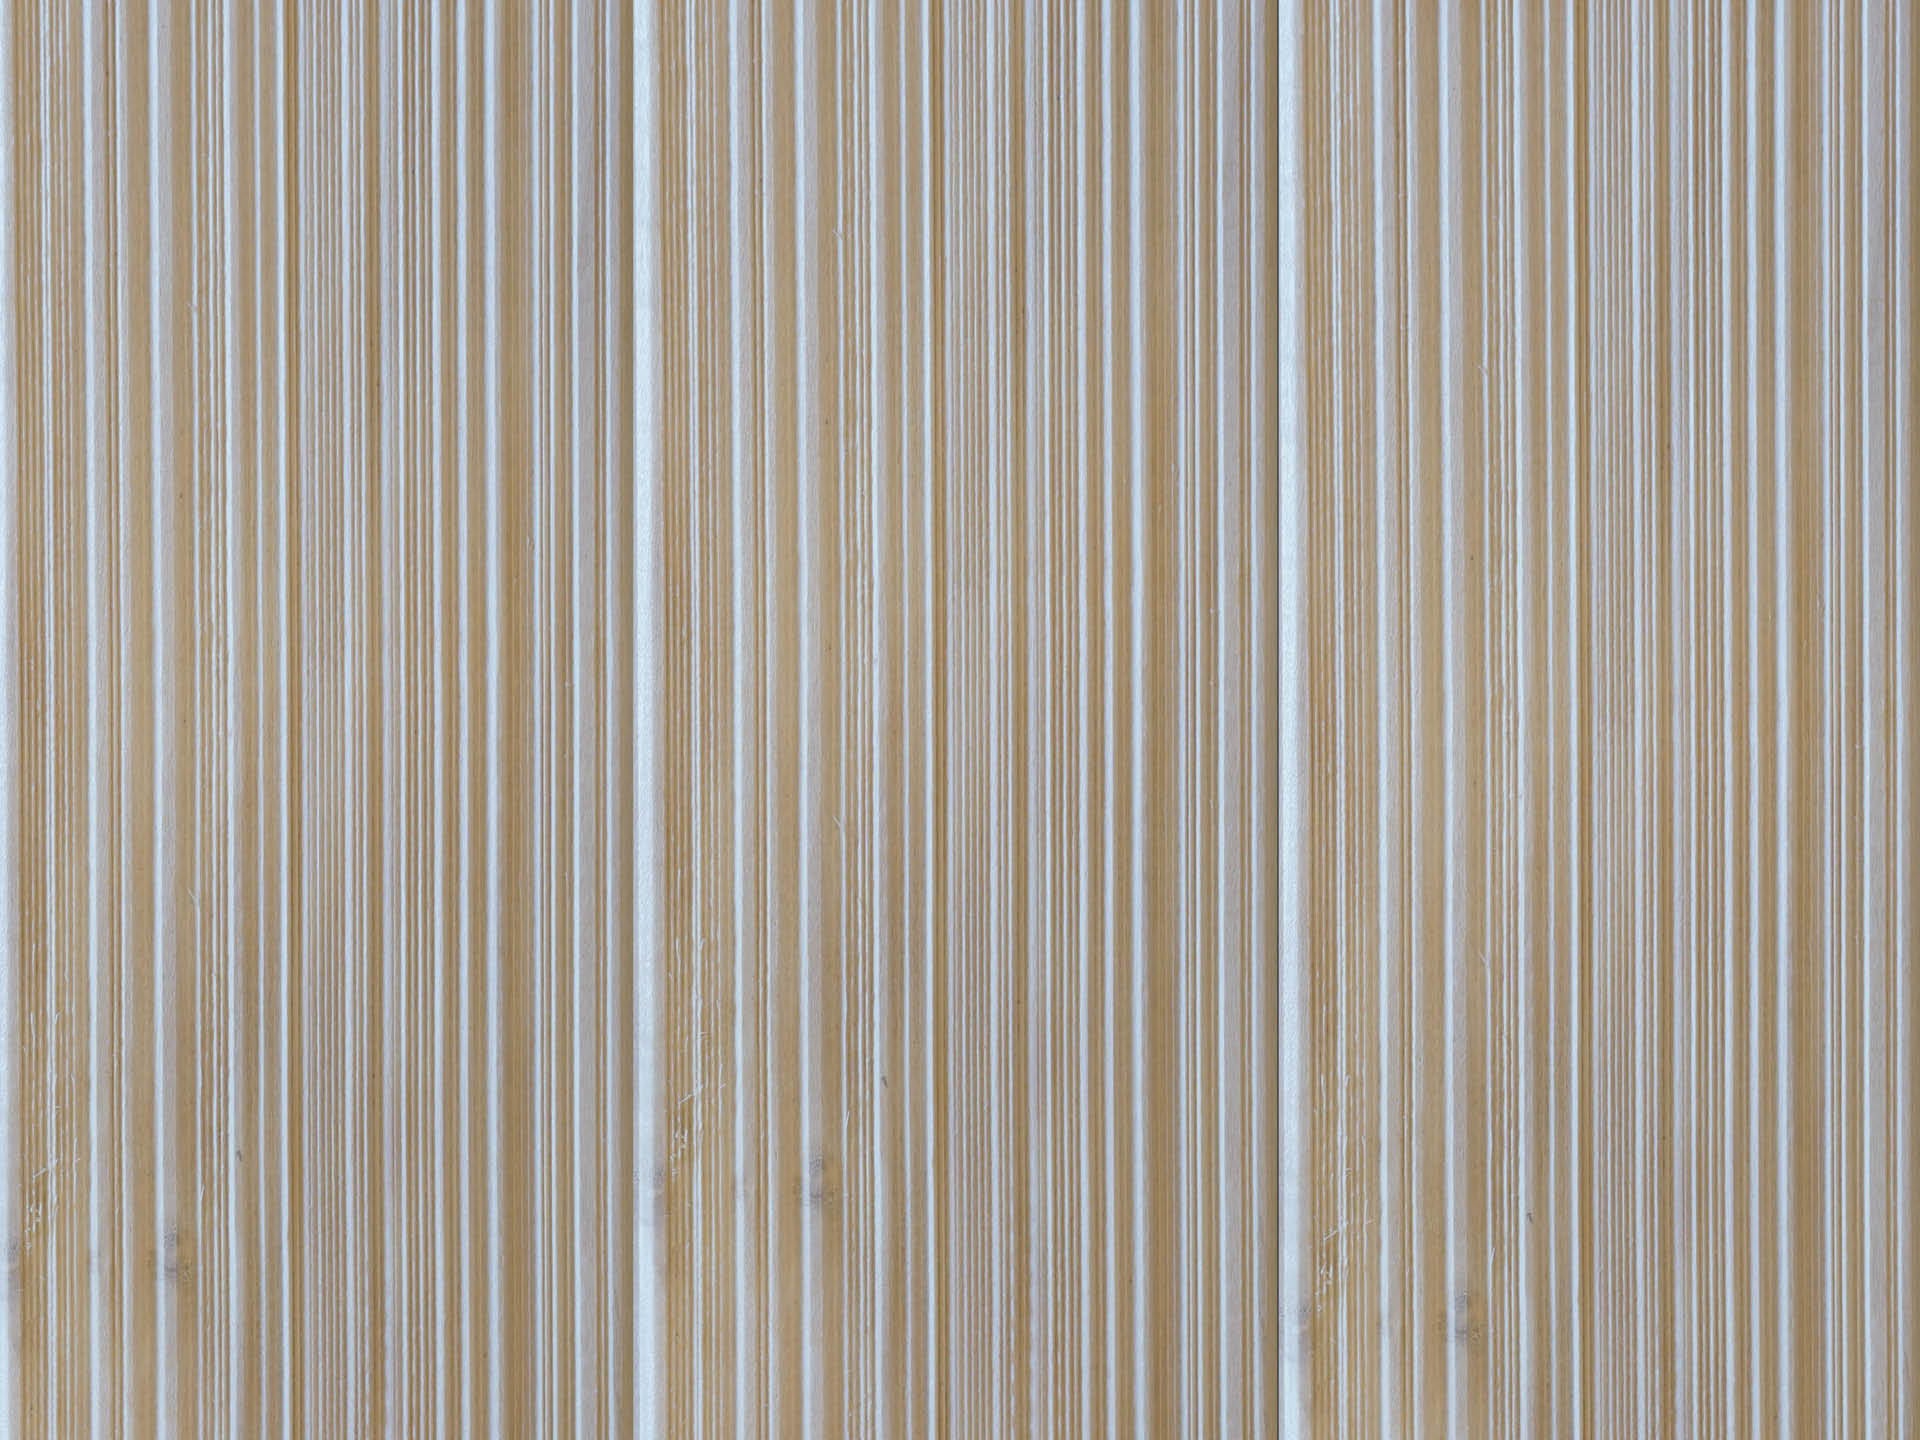 Side by side of Weldtex tongue & groove poplar hardwood plank consisting of a combed, striated, brushed wood appearance common in mid-century modern homes and design